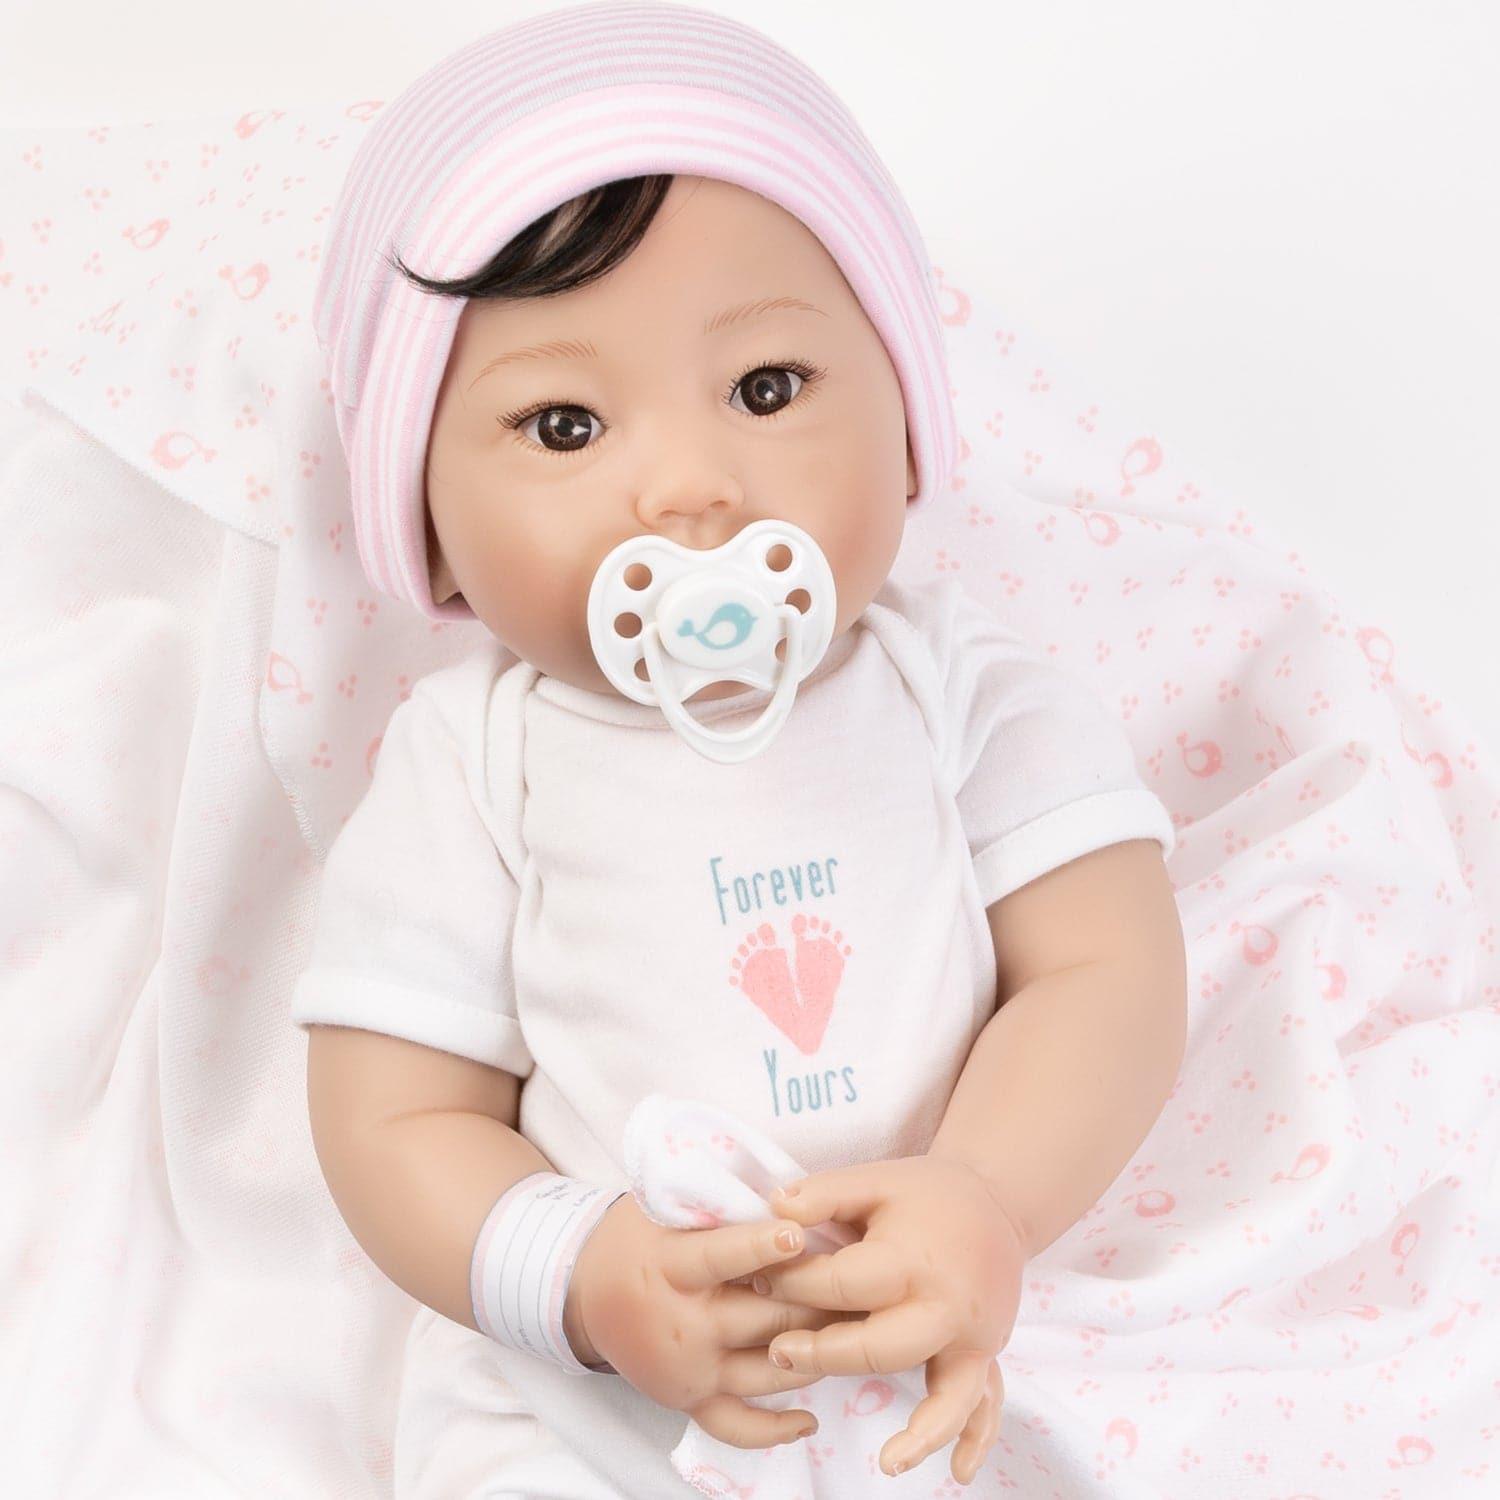 Paradise Galleries Down Syndrome Reborn Baby Doll - Noah [21 inch]